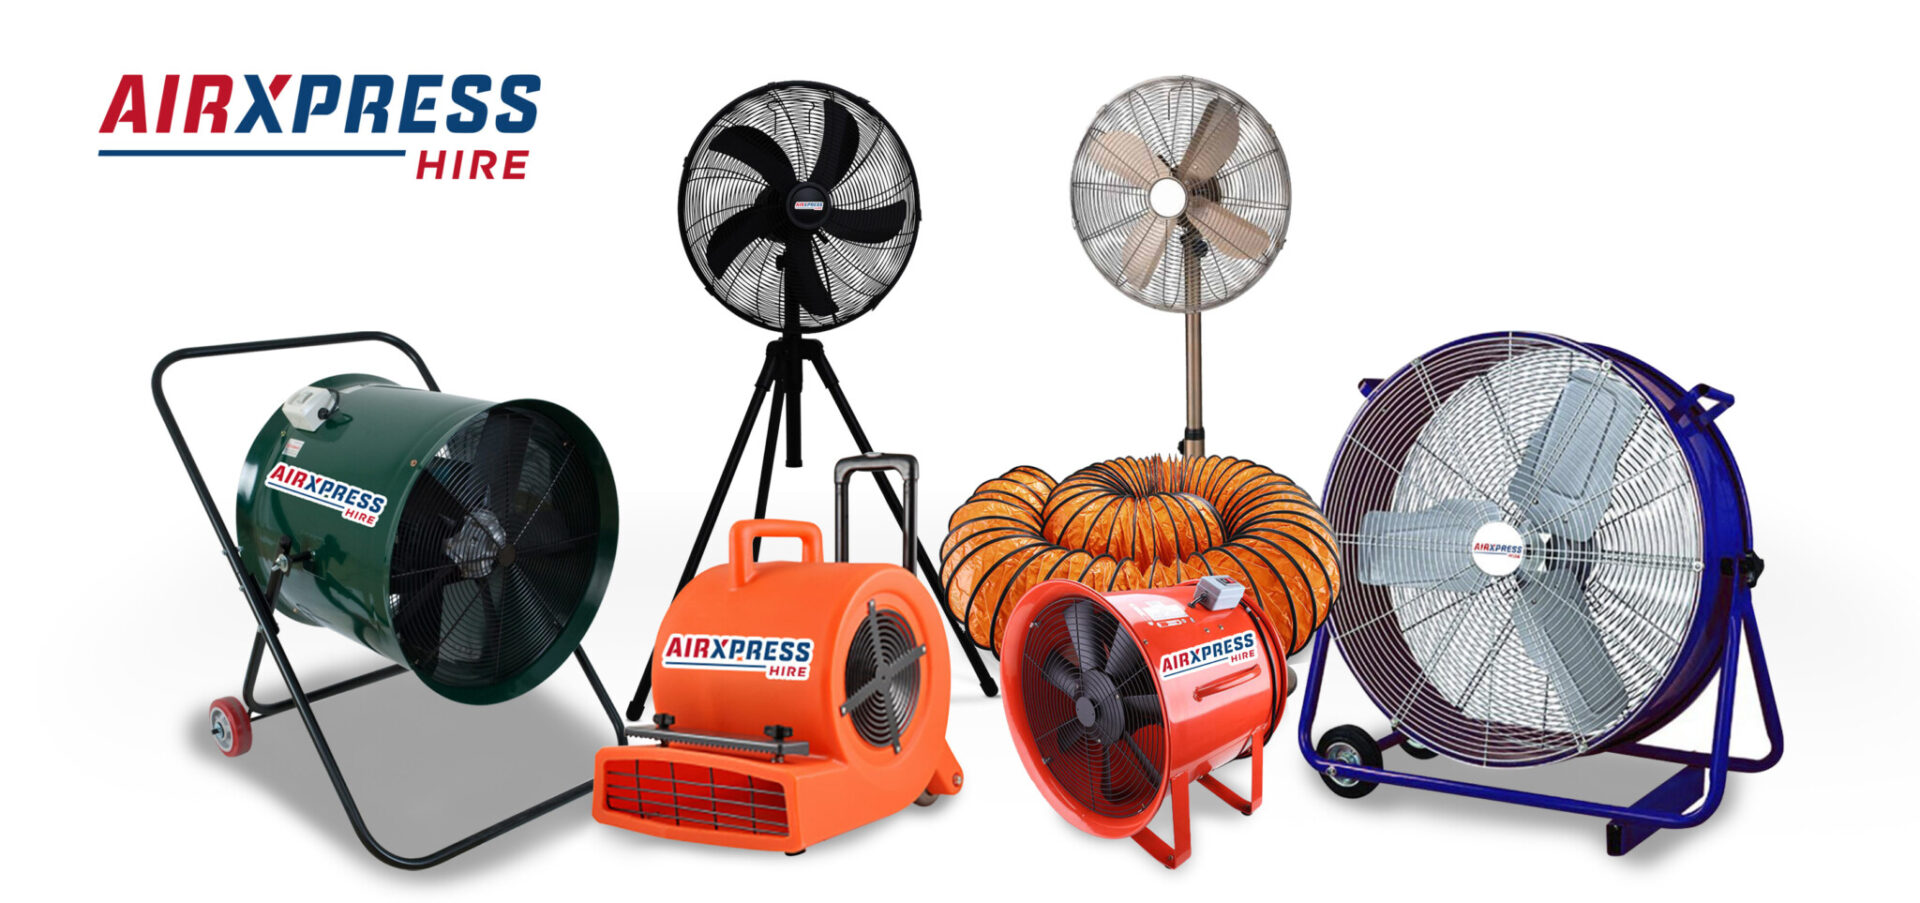 Ventilation Banner - Air Conditioners and Extraction Fans for Rent - Equipment for Hire